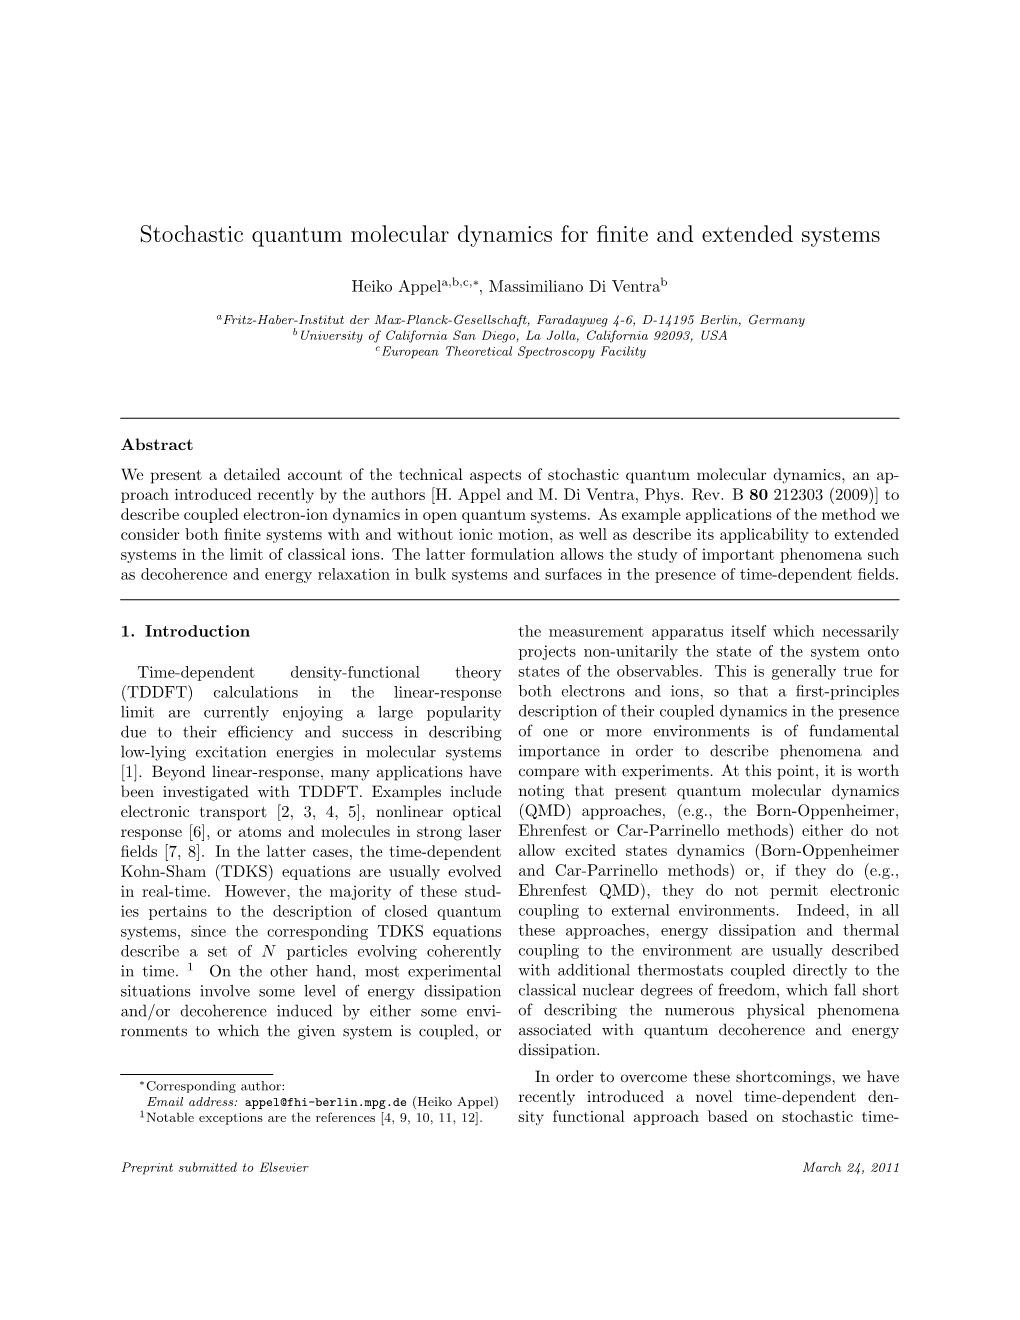 Stochastic Quantum Molecular Dynamics for Finite and Extended